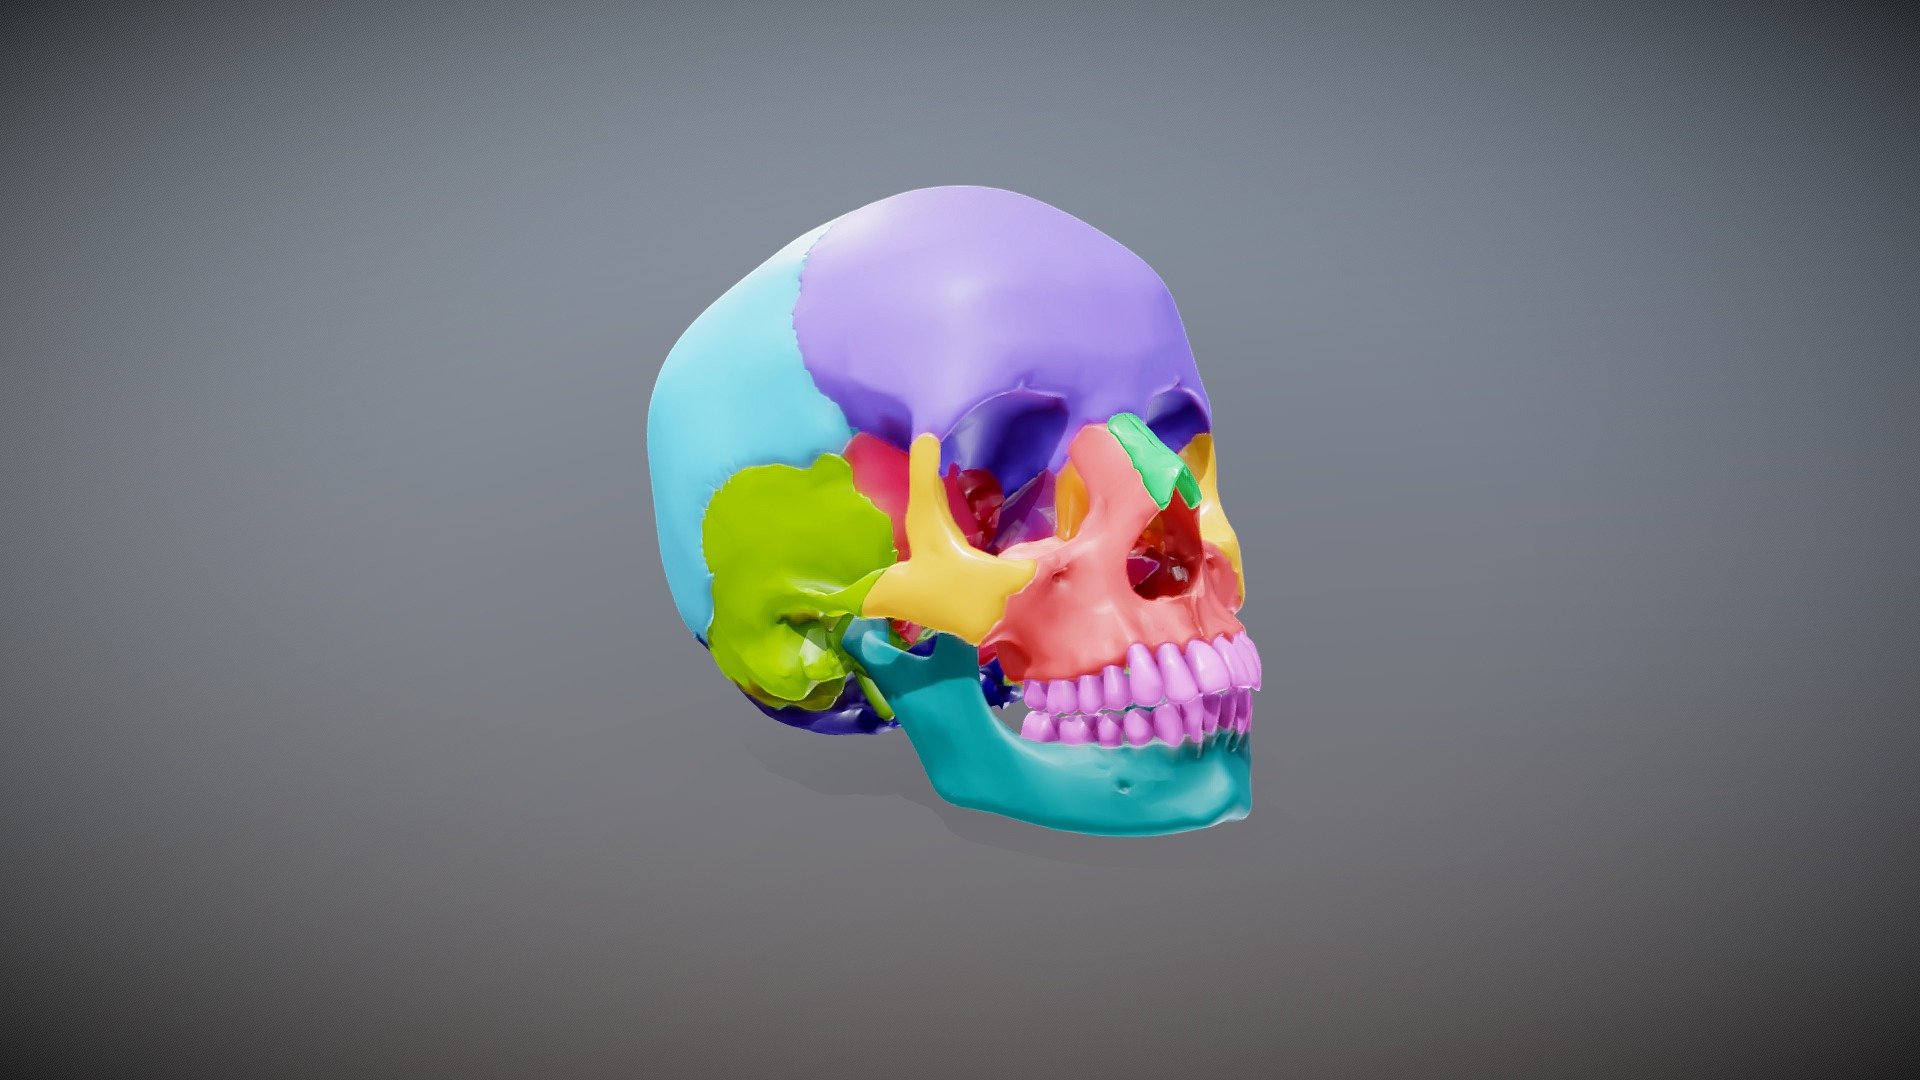 Anatomy Quick Guide: The Skull